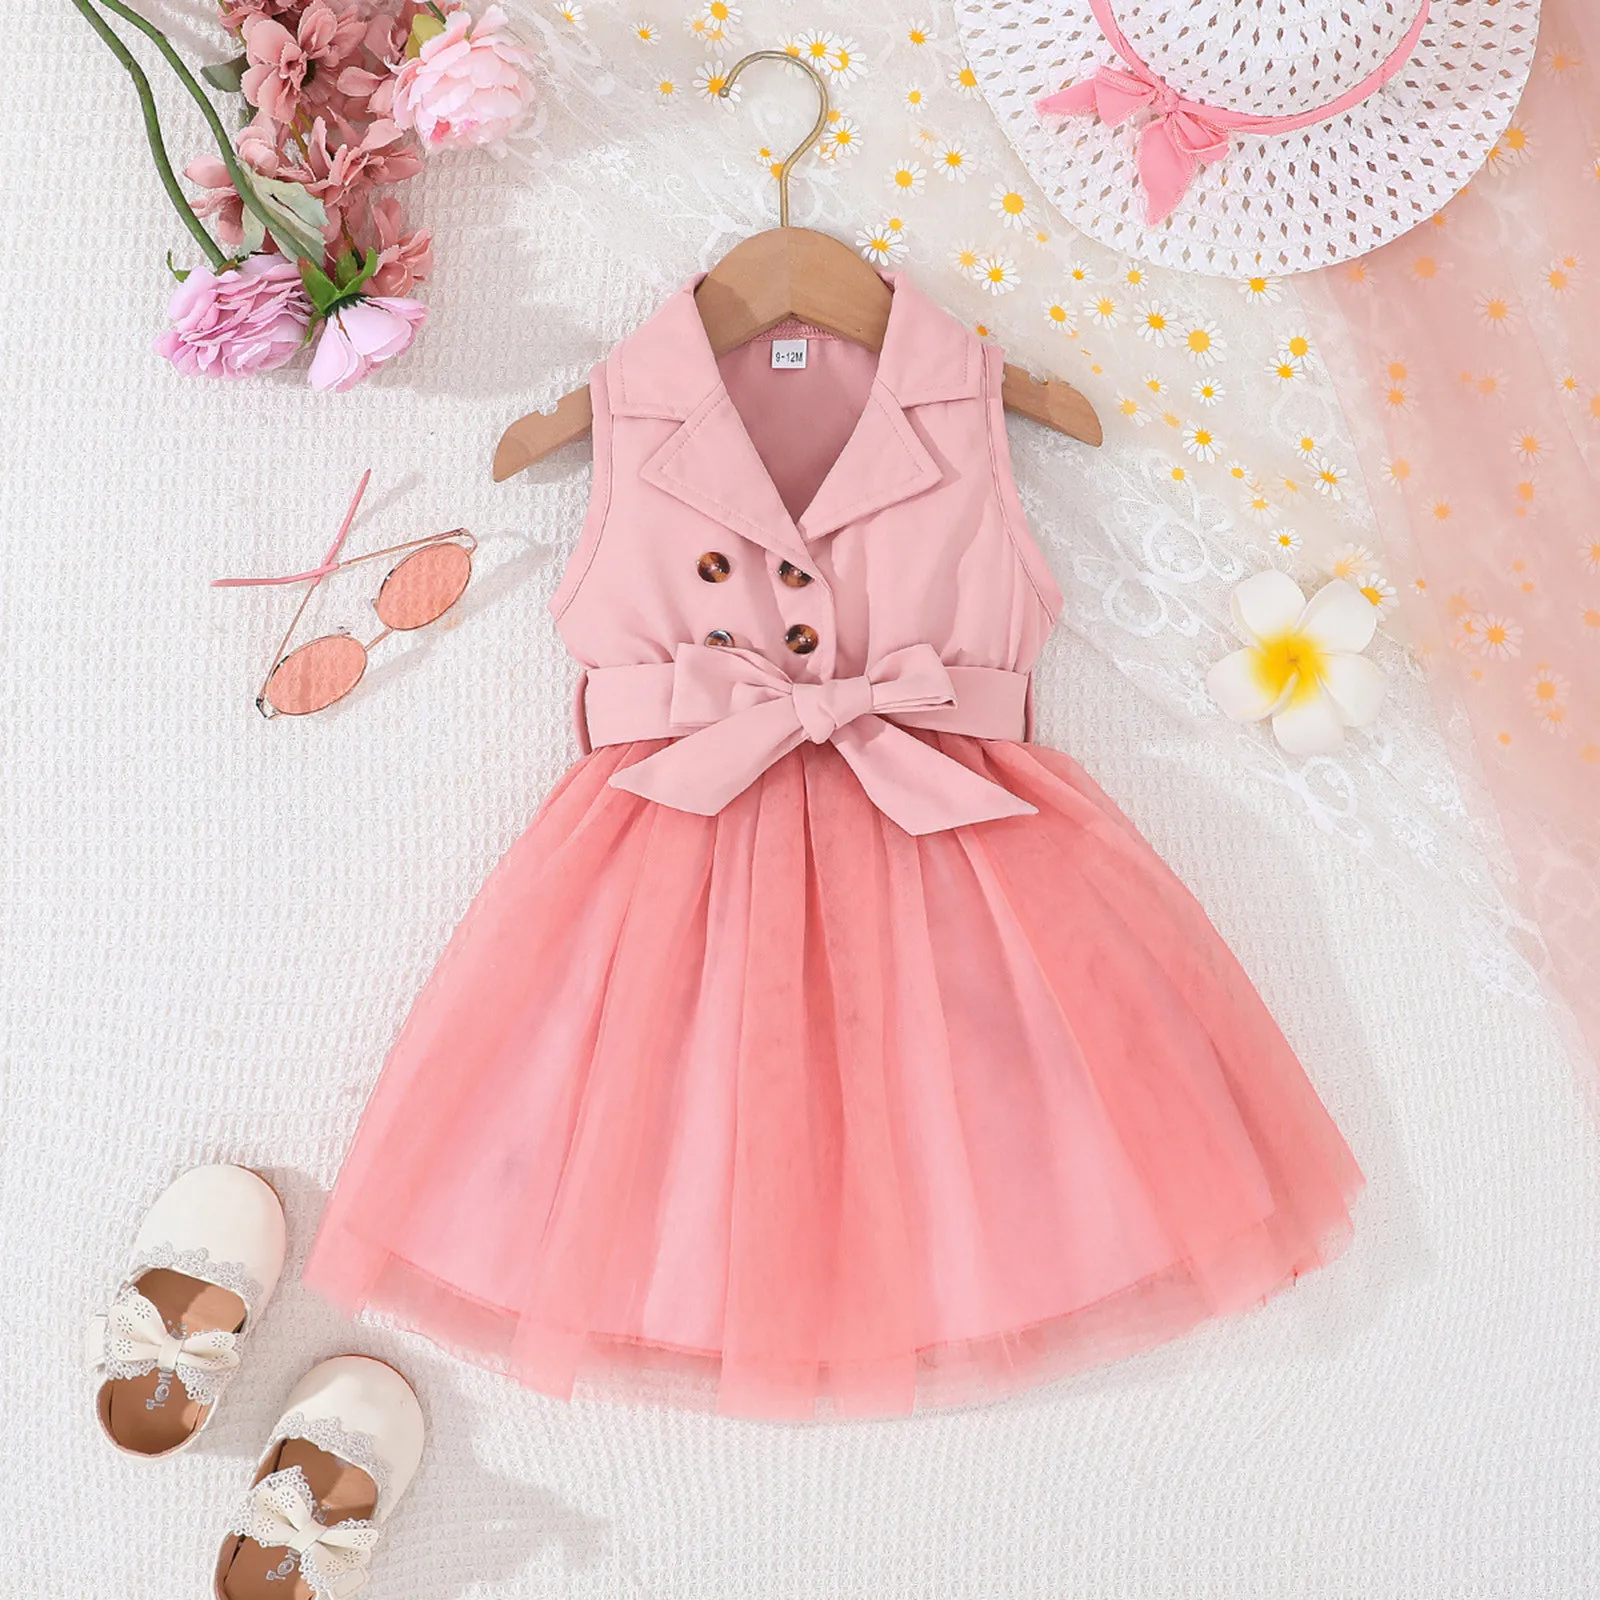 

Todder Infant Baby Girls Lapel Blazer Dress Casual A-line Dress Sleeveless Mesh Patchwork Tulle Dress Belted Baby Clothing 1-5Y